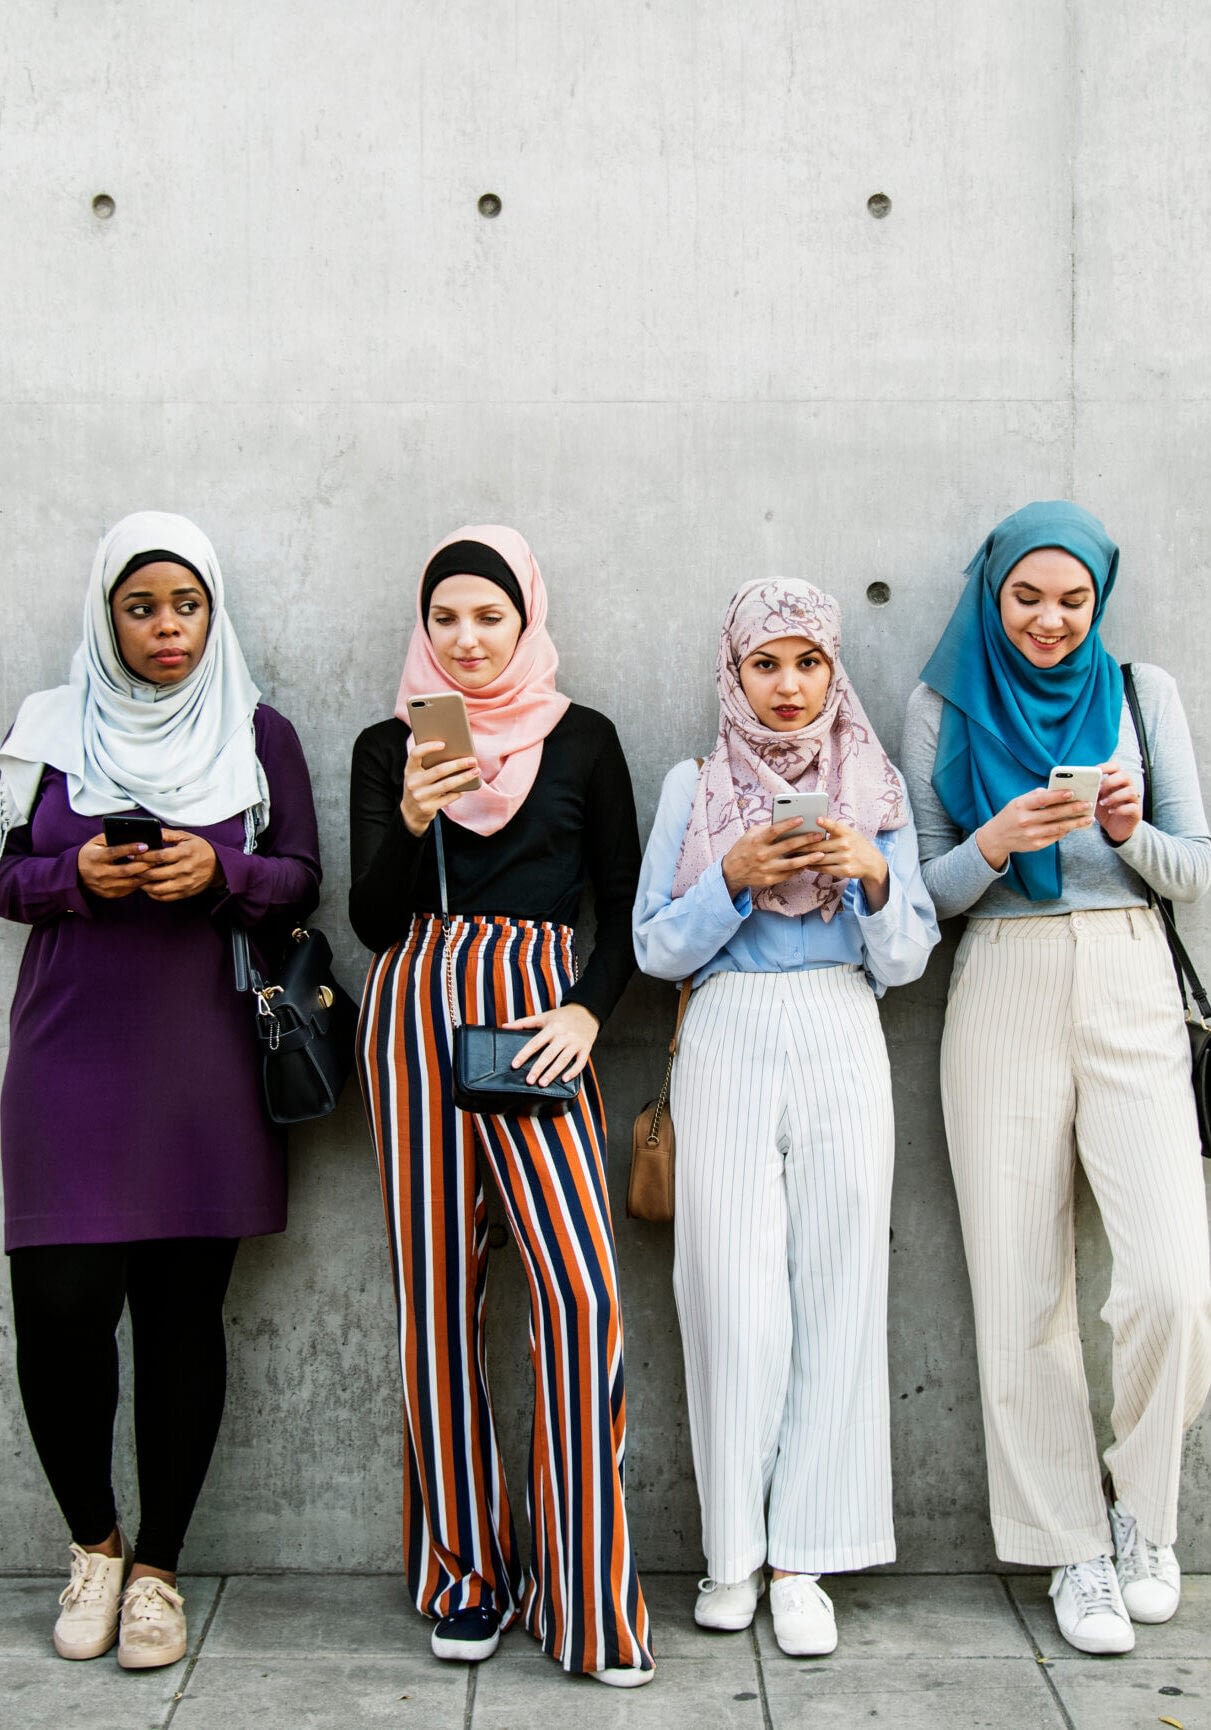 4 women wearing hijabs using smartphones, leaing against a concrete wall